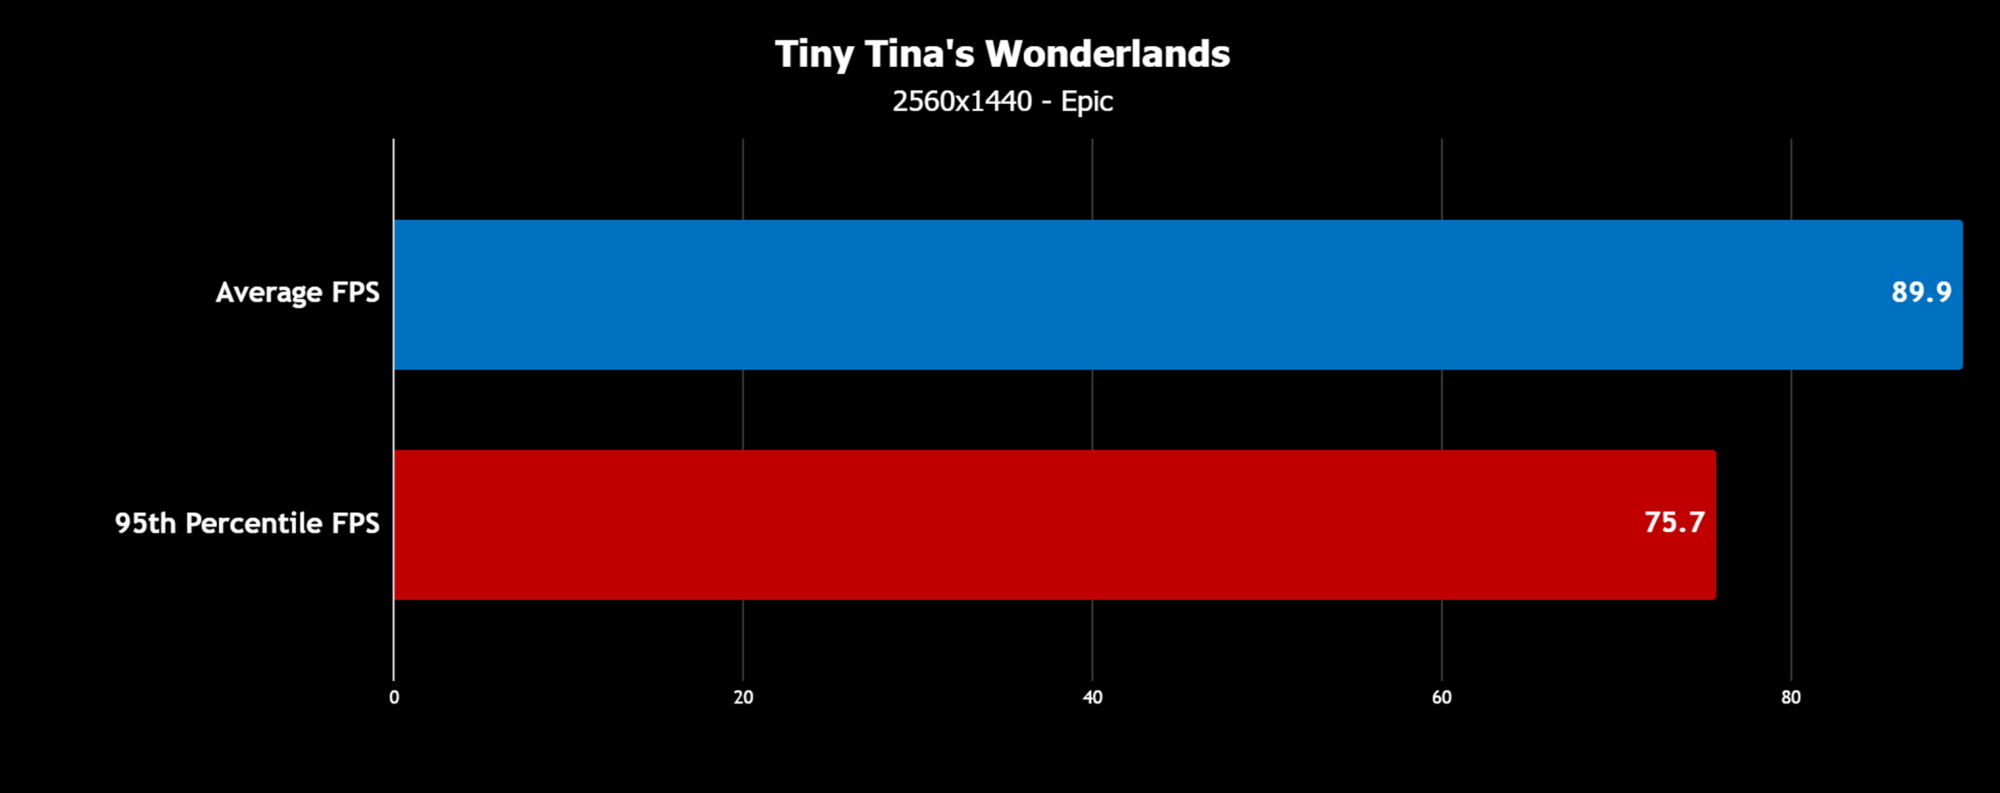 A graph showing 89.9 average FPS in Tiny Tina’s Wonderlands.